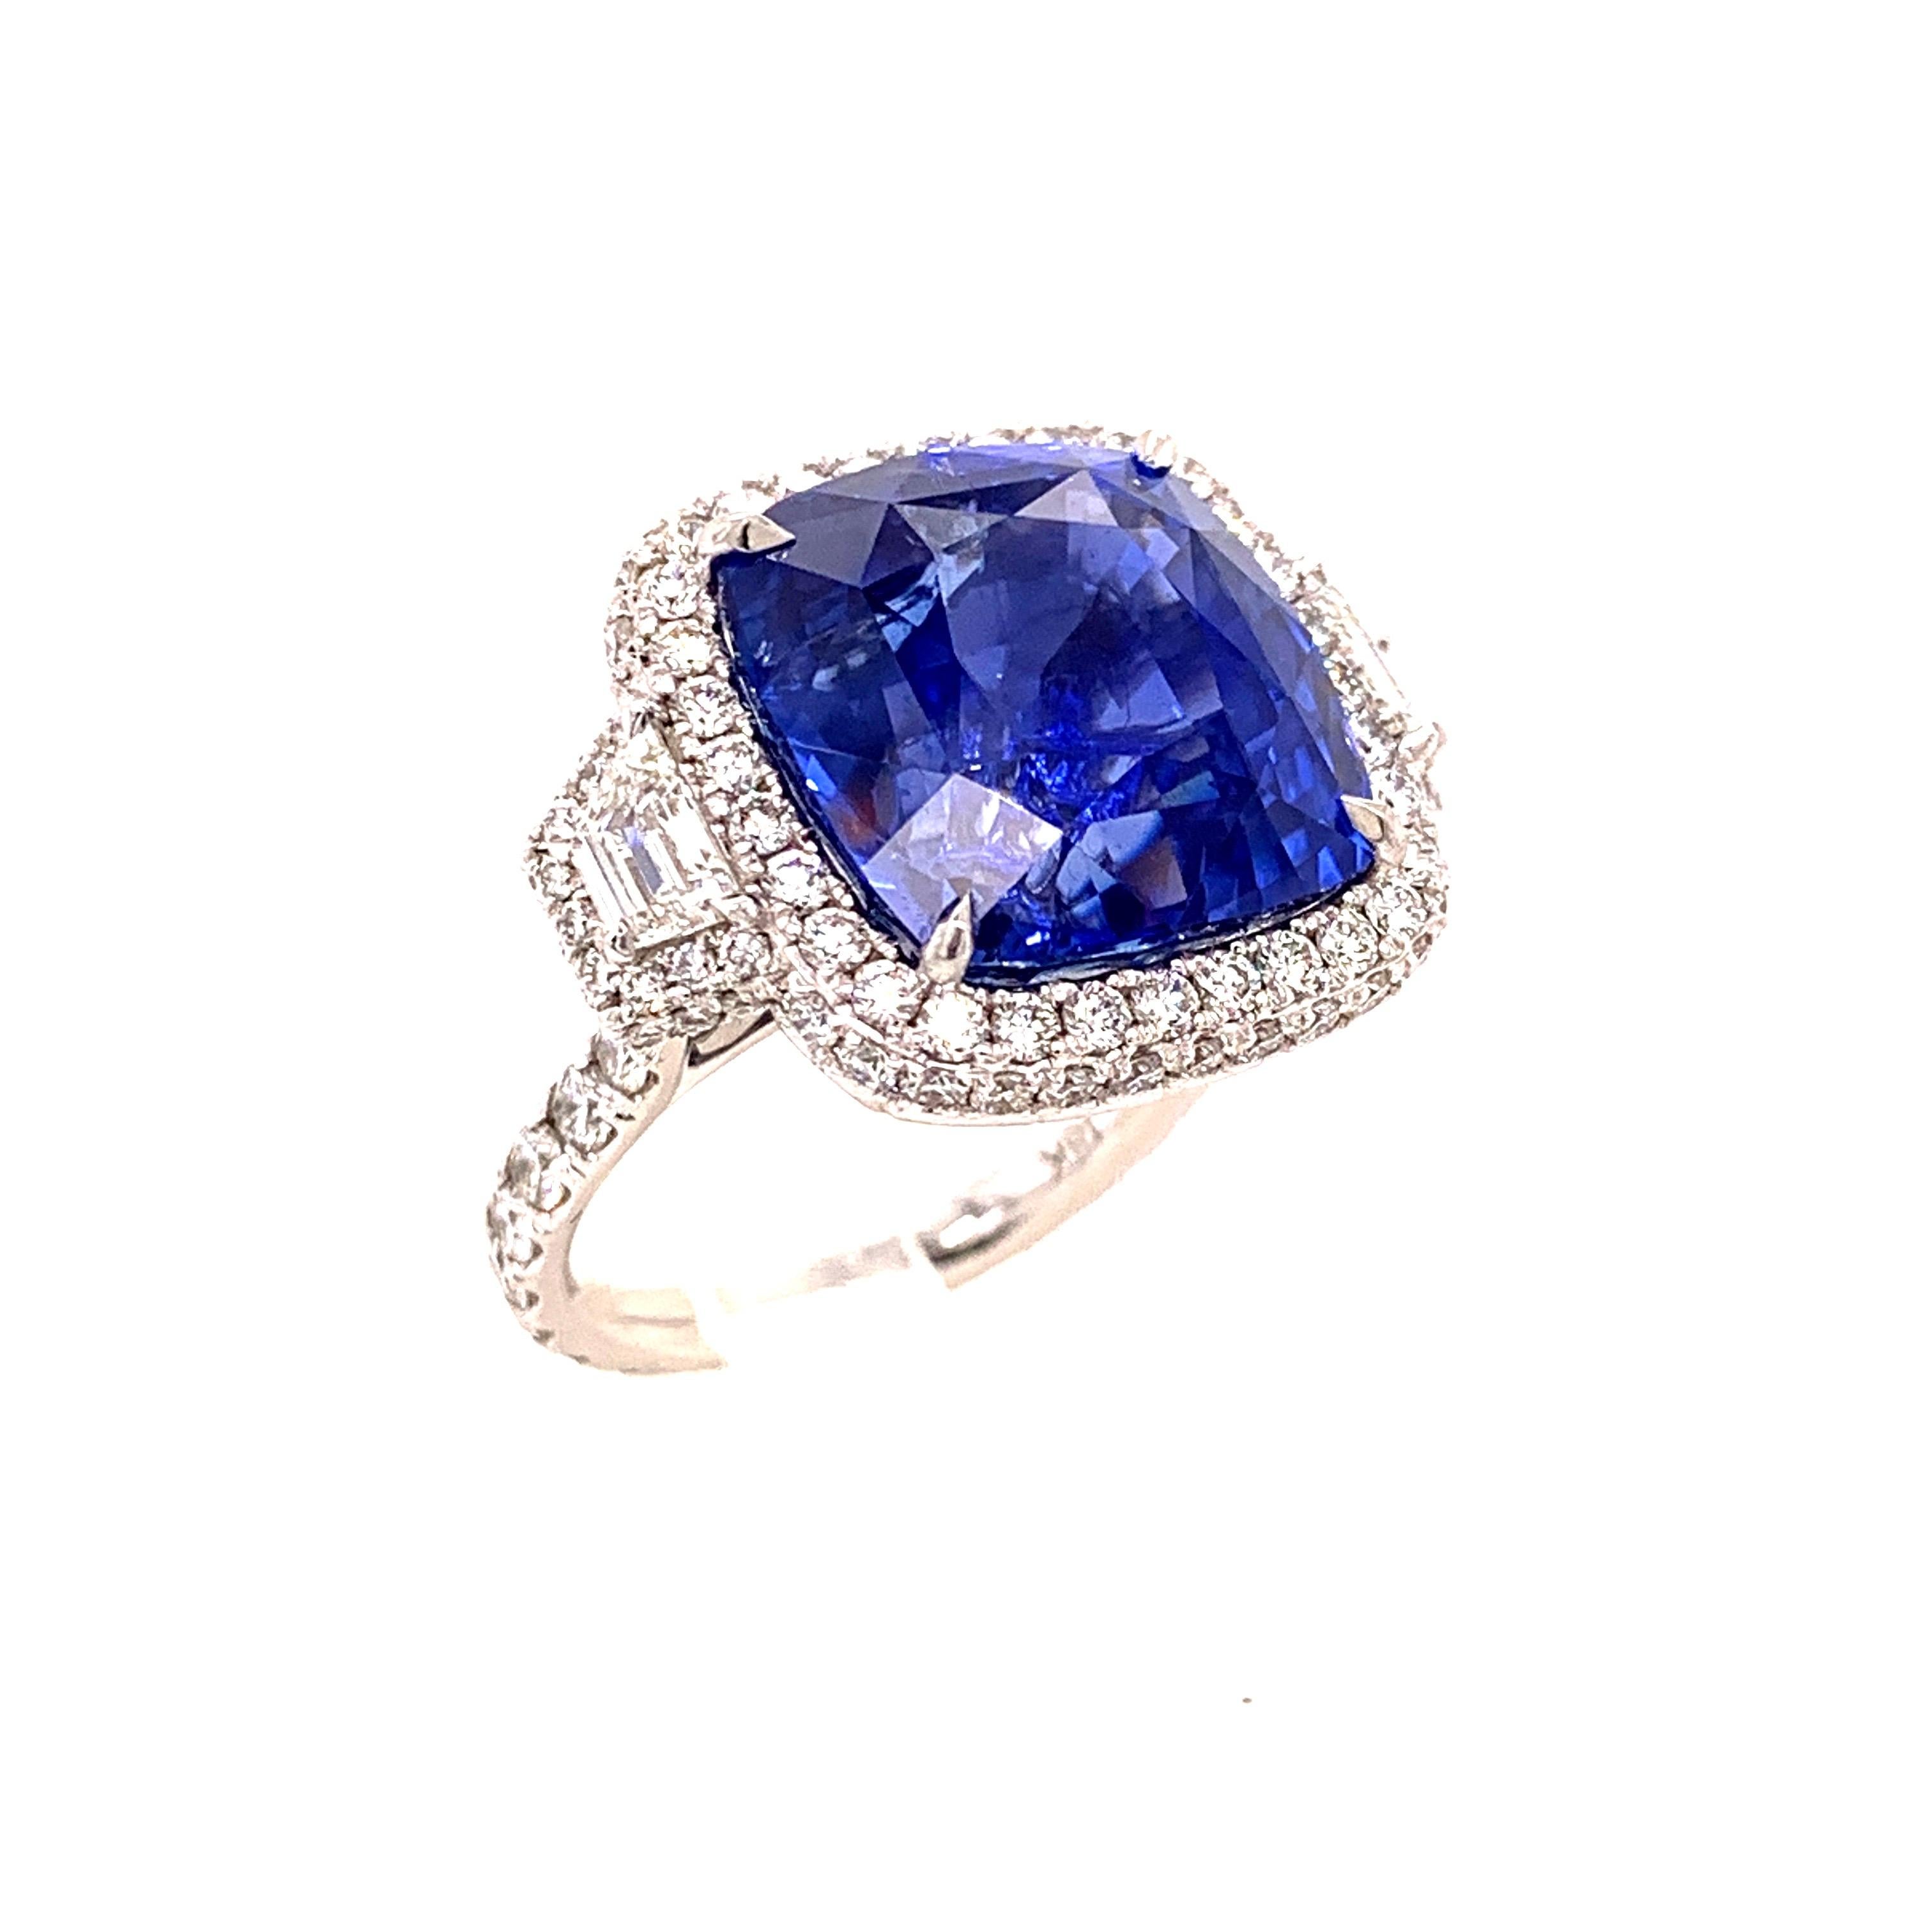 Glamorous unheated sapphire diamond cocktail ring. Lively 